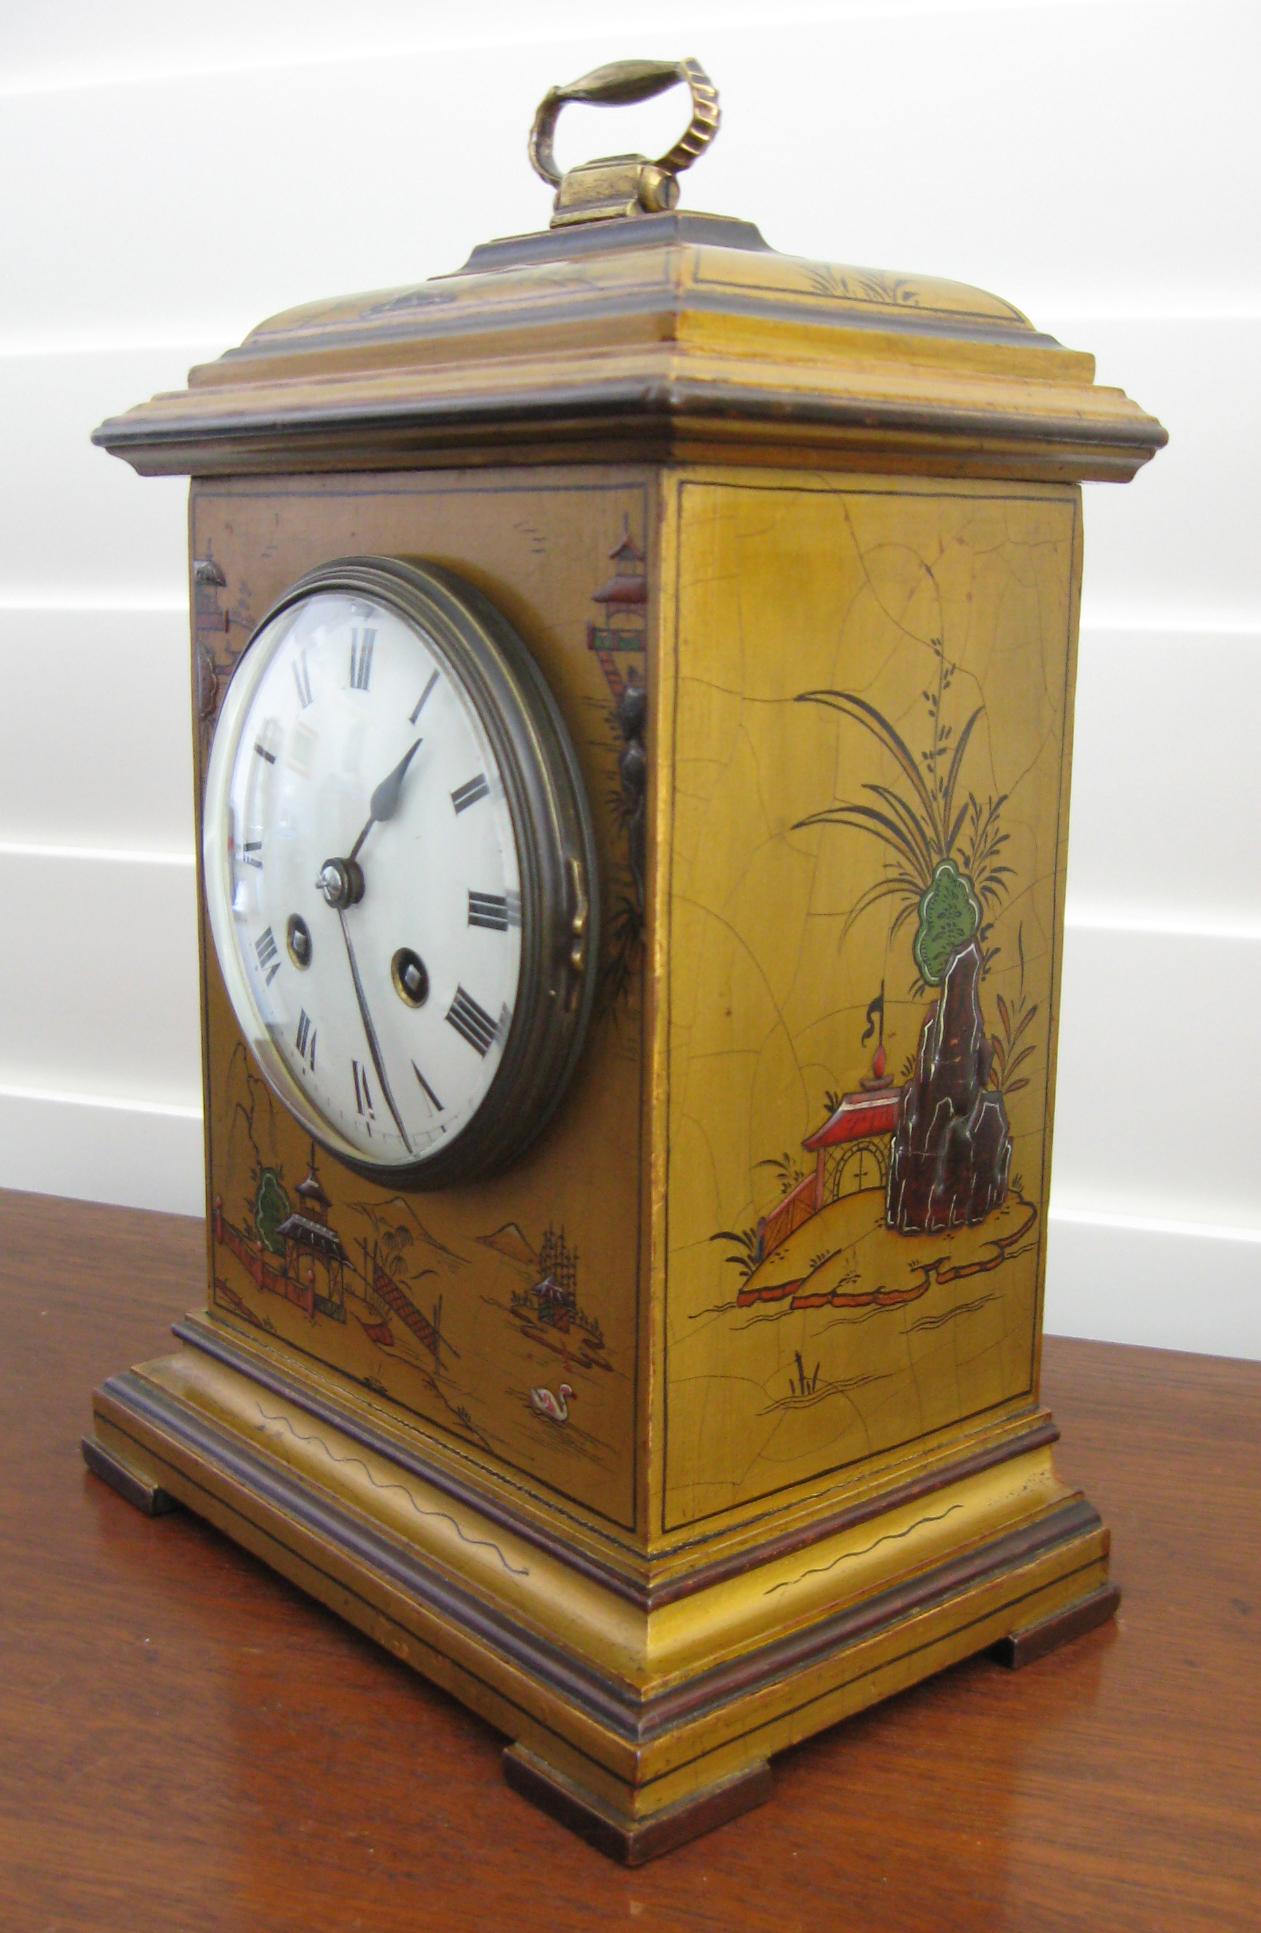 A decorative two train English gold chinoiserie mantel clock of small proportions, circa 1920. The Georgian style rectangular case with brass carry handle and stepped base, decorated in relief with scenes of pagodas and landscapes. 

The enameled